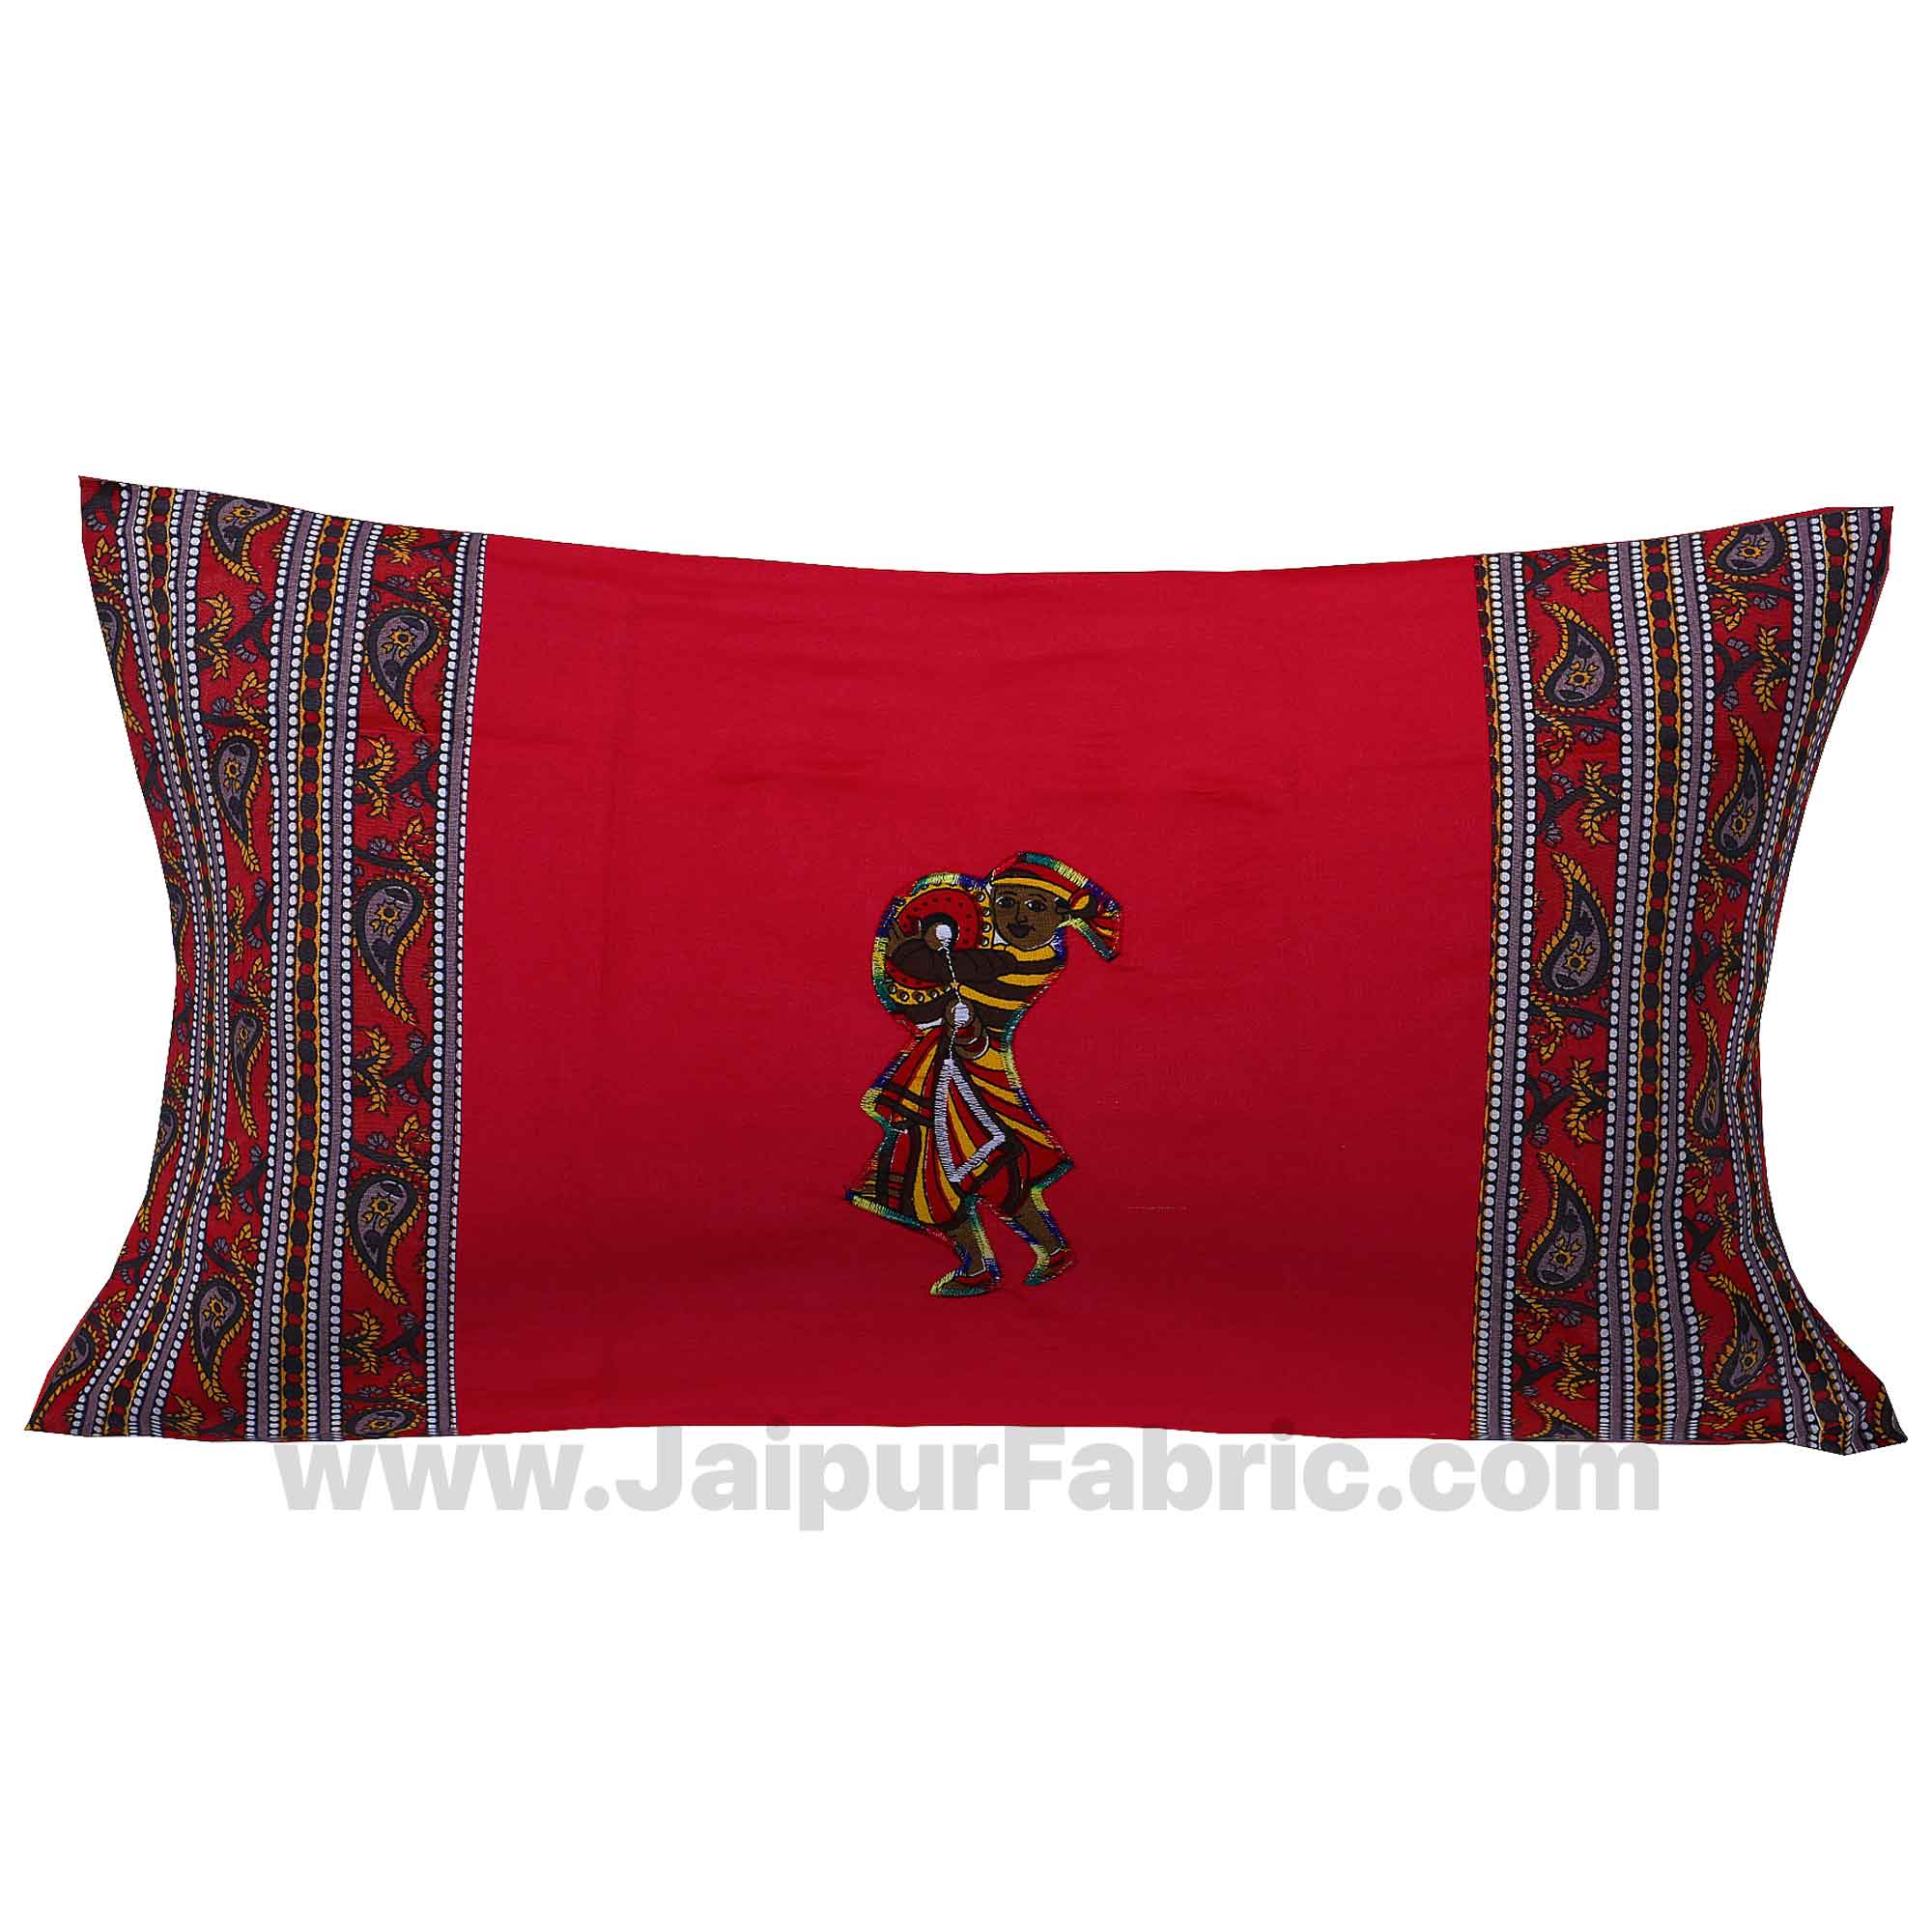 Applique Red Chang Dance Jaipuri  Hand Made Embroidery Patch Work Single Bedsheet